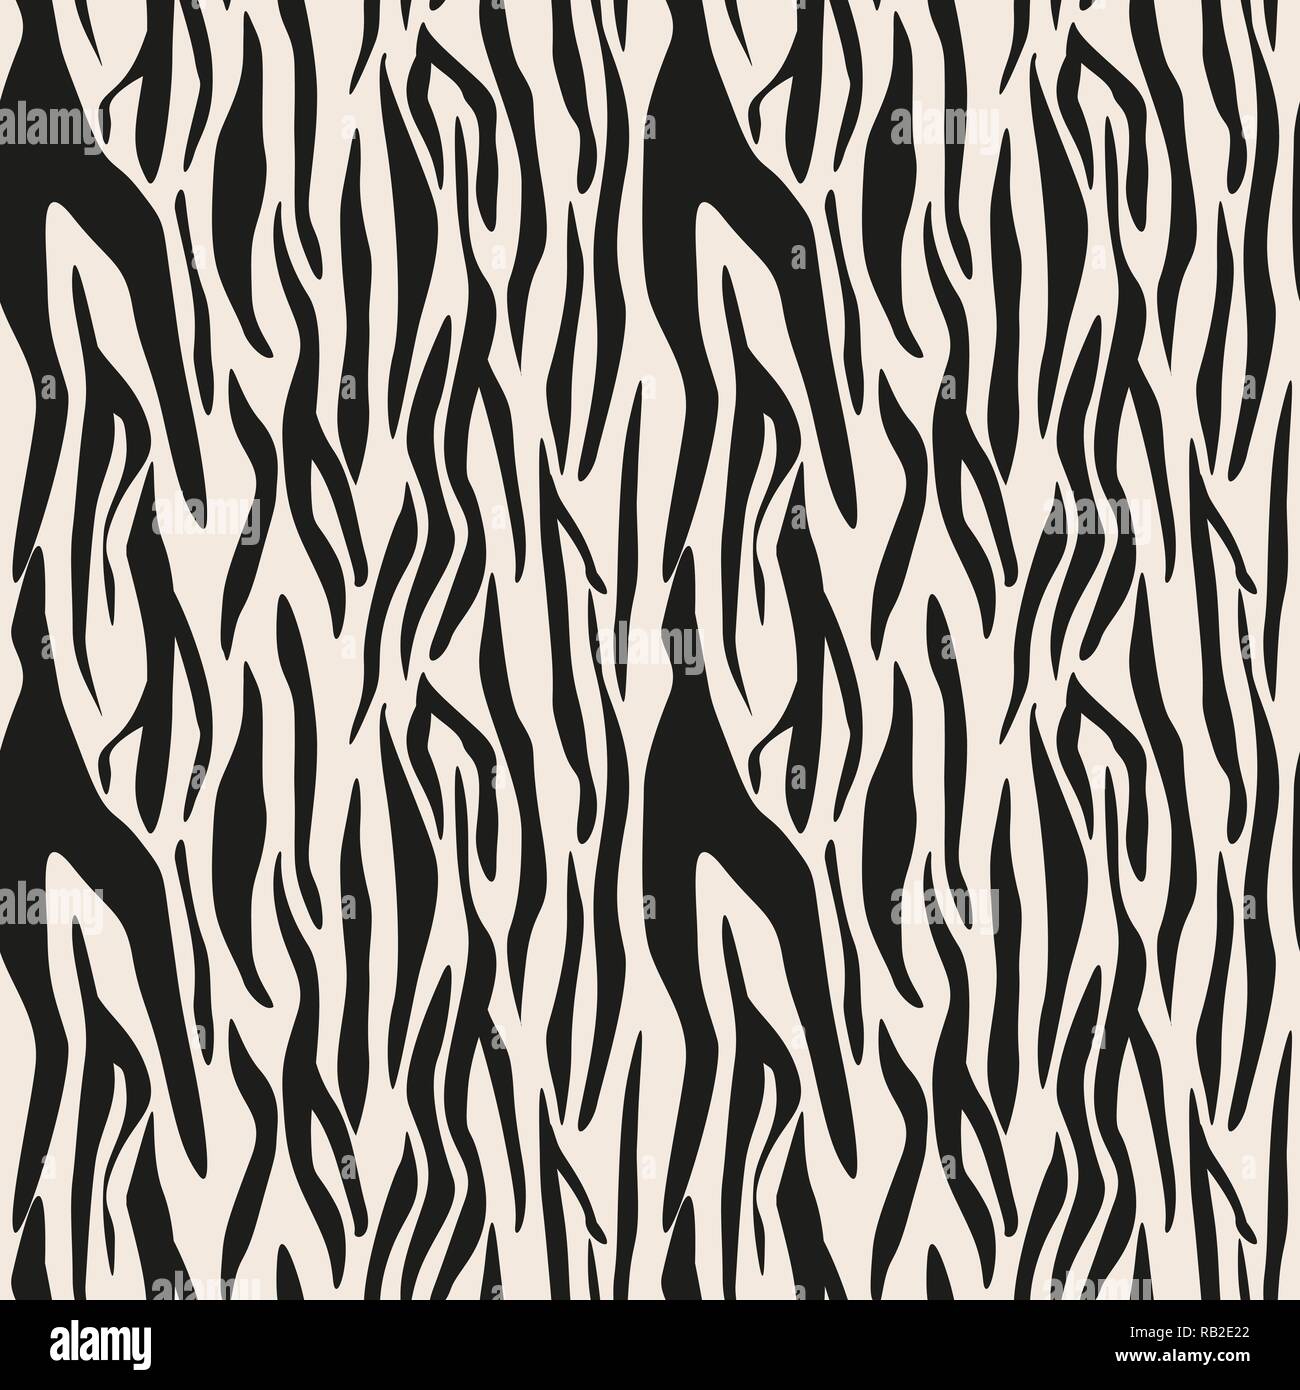 Vector zebra seamless pattern. Black and white beautiful texture. Perfectly for wrapping paper, bed linen, textile, fabric, cover, wallpaper, fashion, Stock Vector